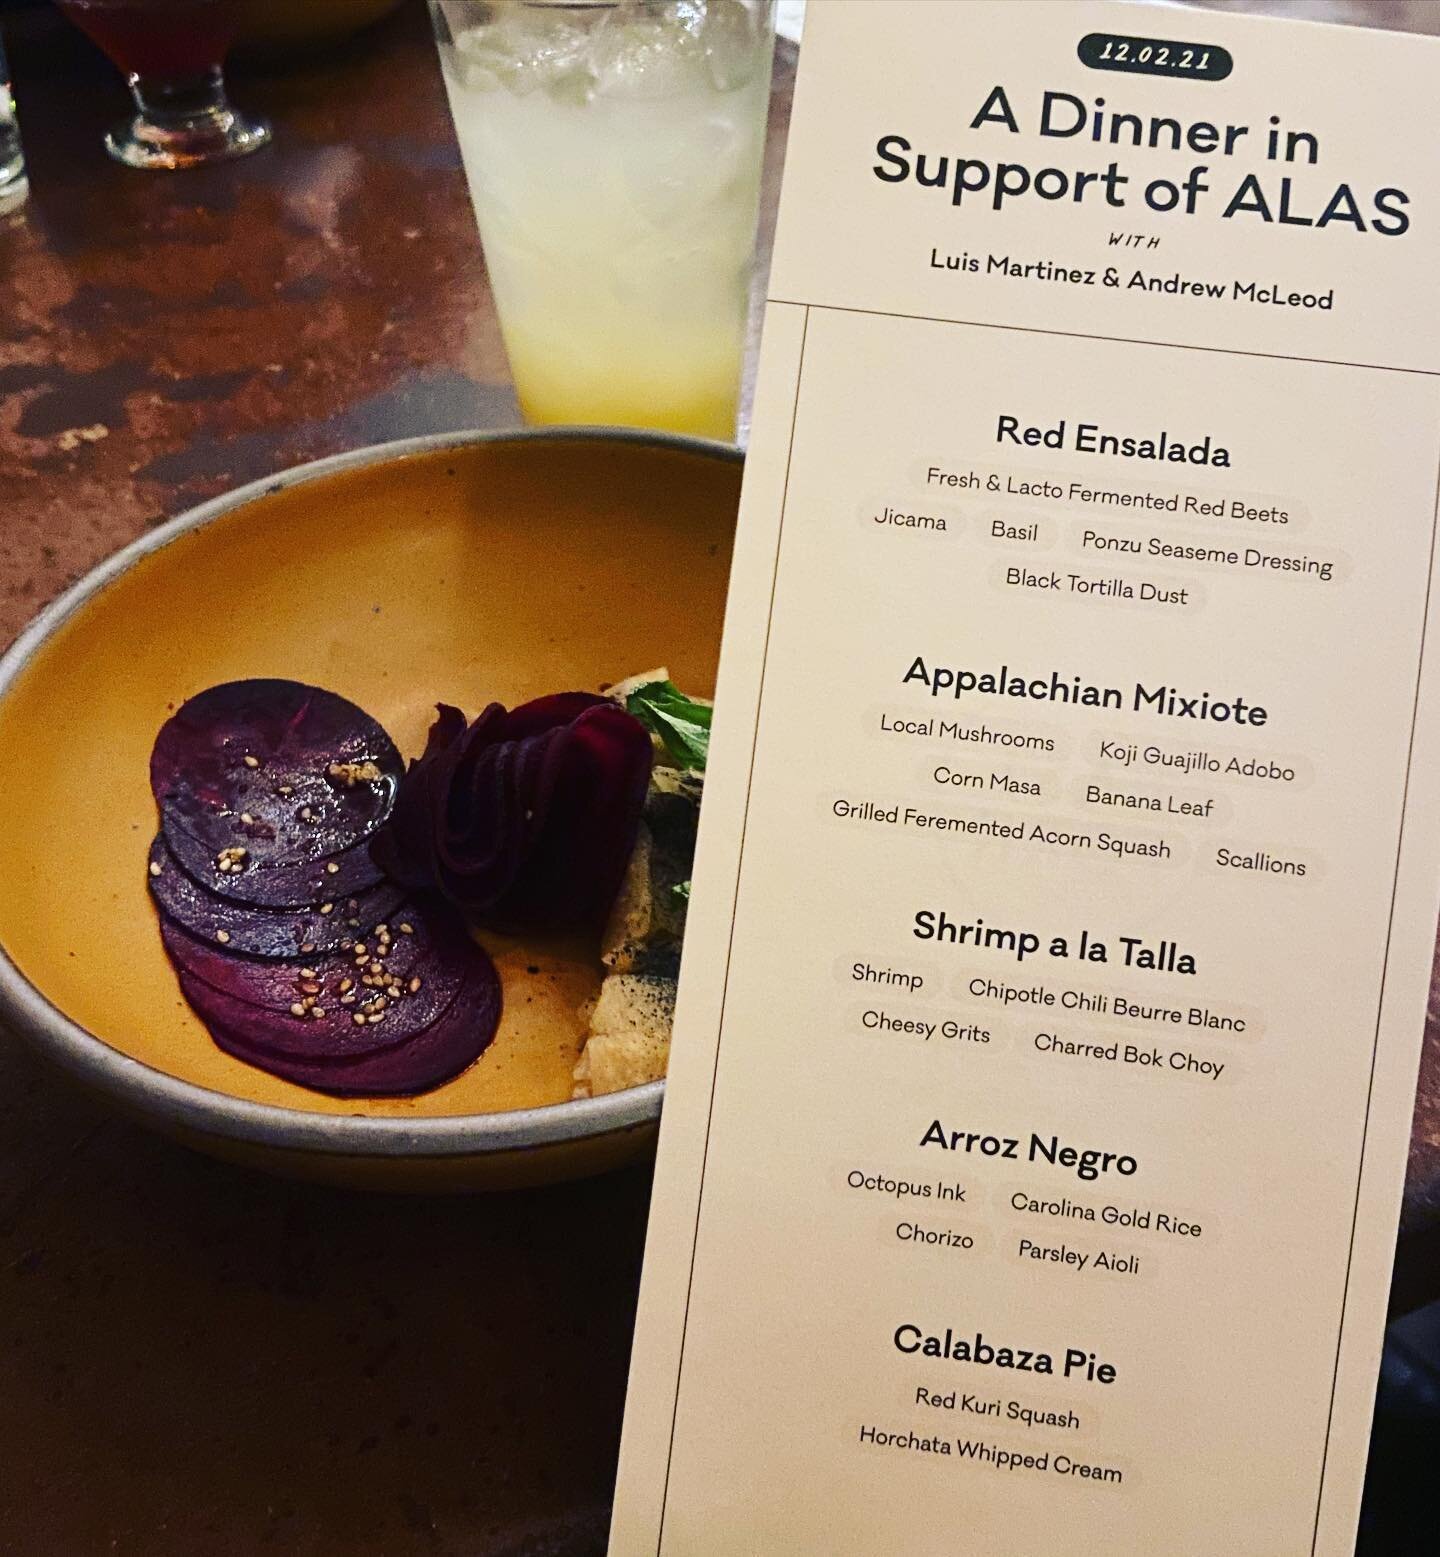 Thank you to @luismartinezcreative, @avenuemavl, @eastforkpottery for putting together this amazing event in support of ALAS! 

The food was absolutely incredible and all guests left with a beautiful dish by East Fork. We are so grateful to our commu